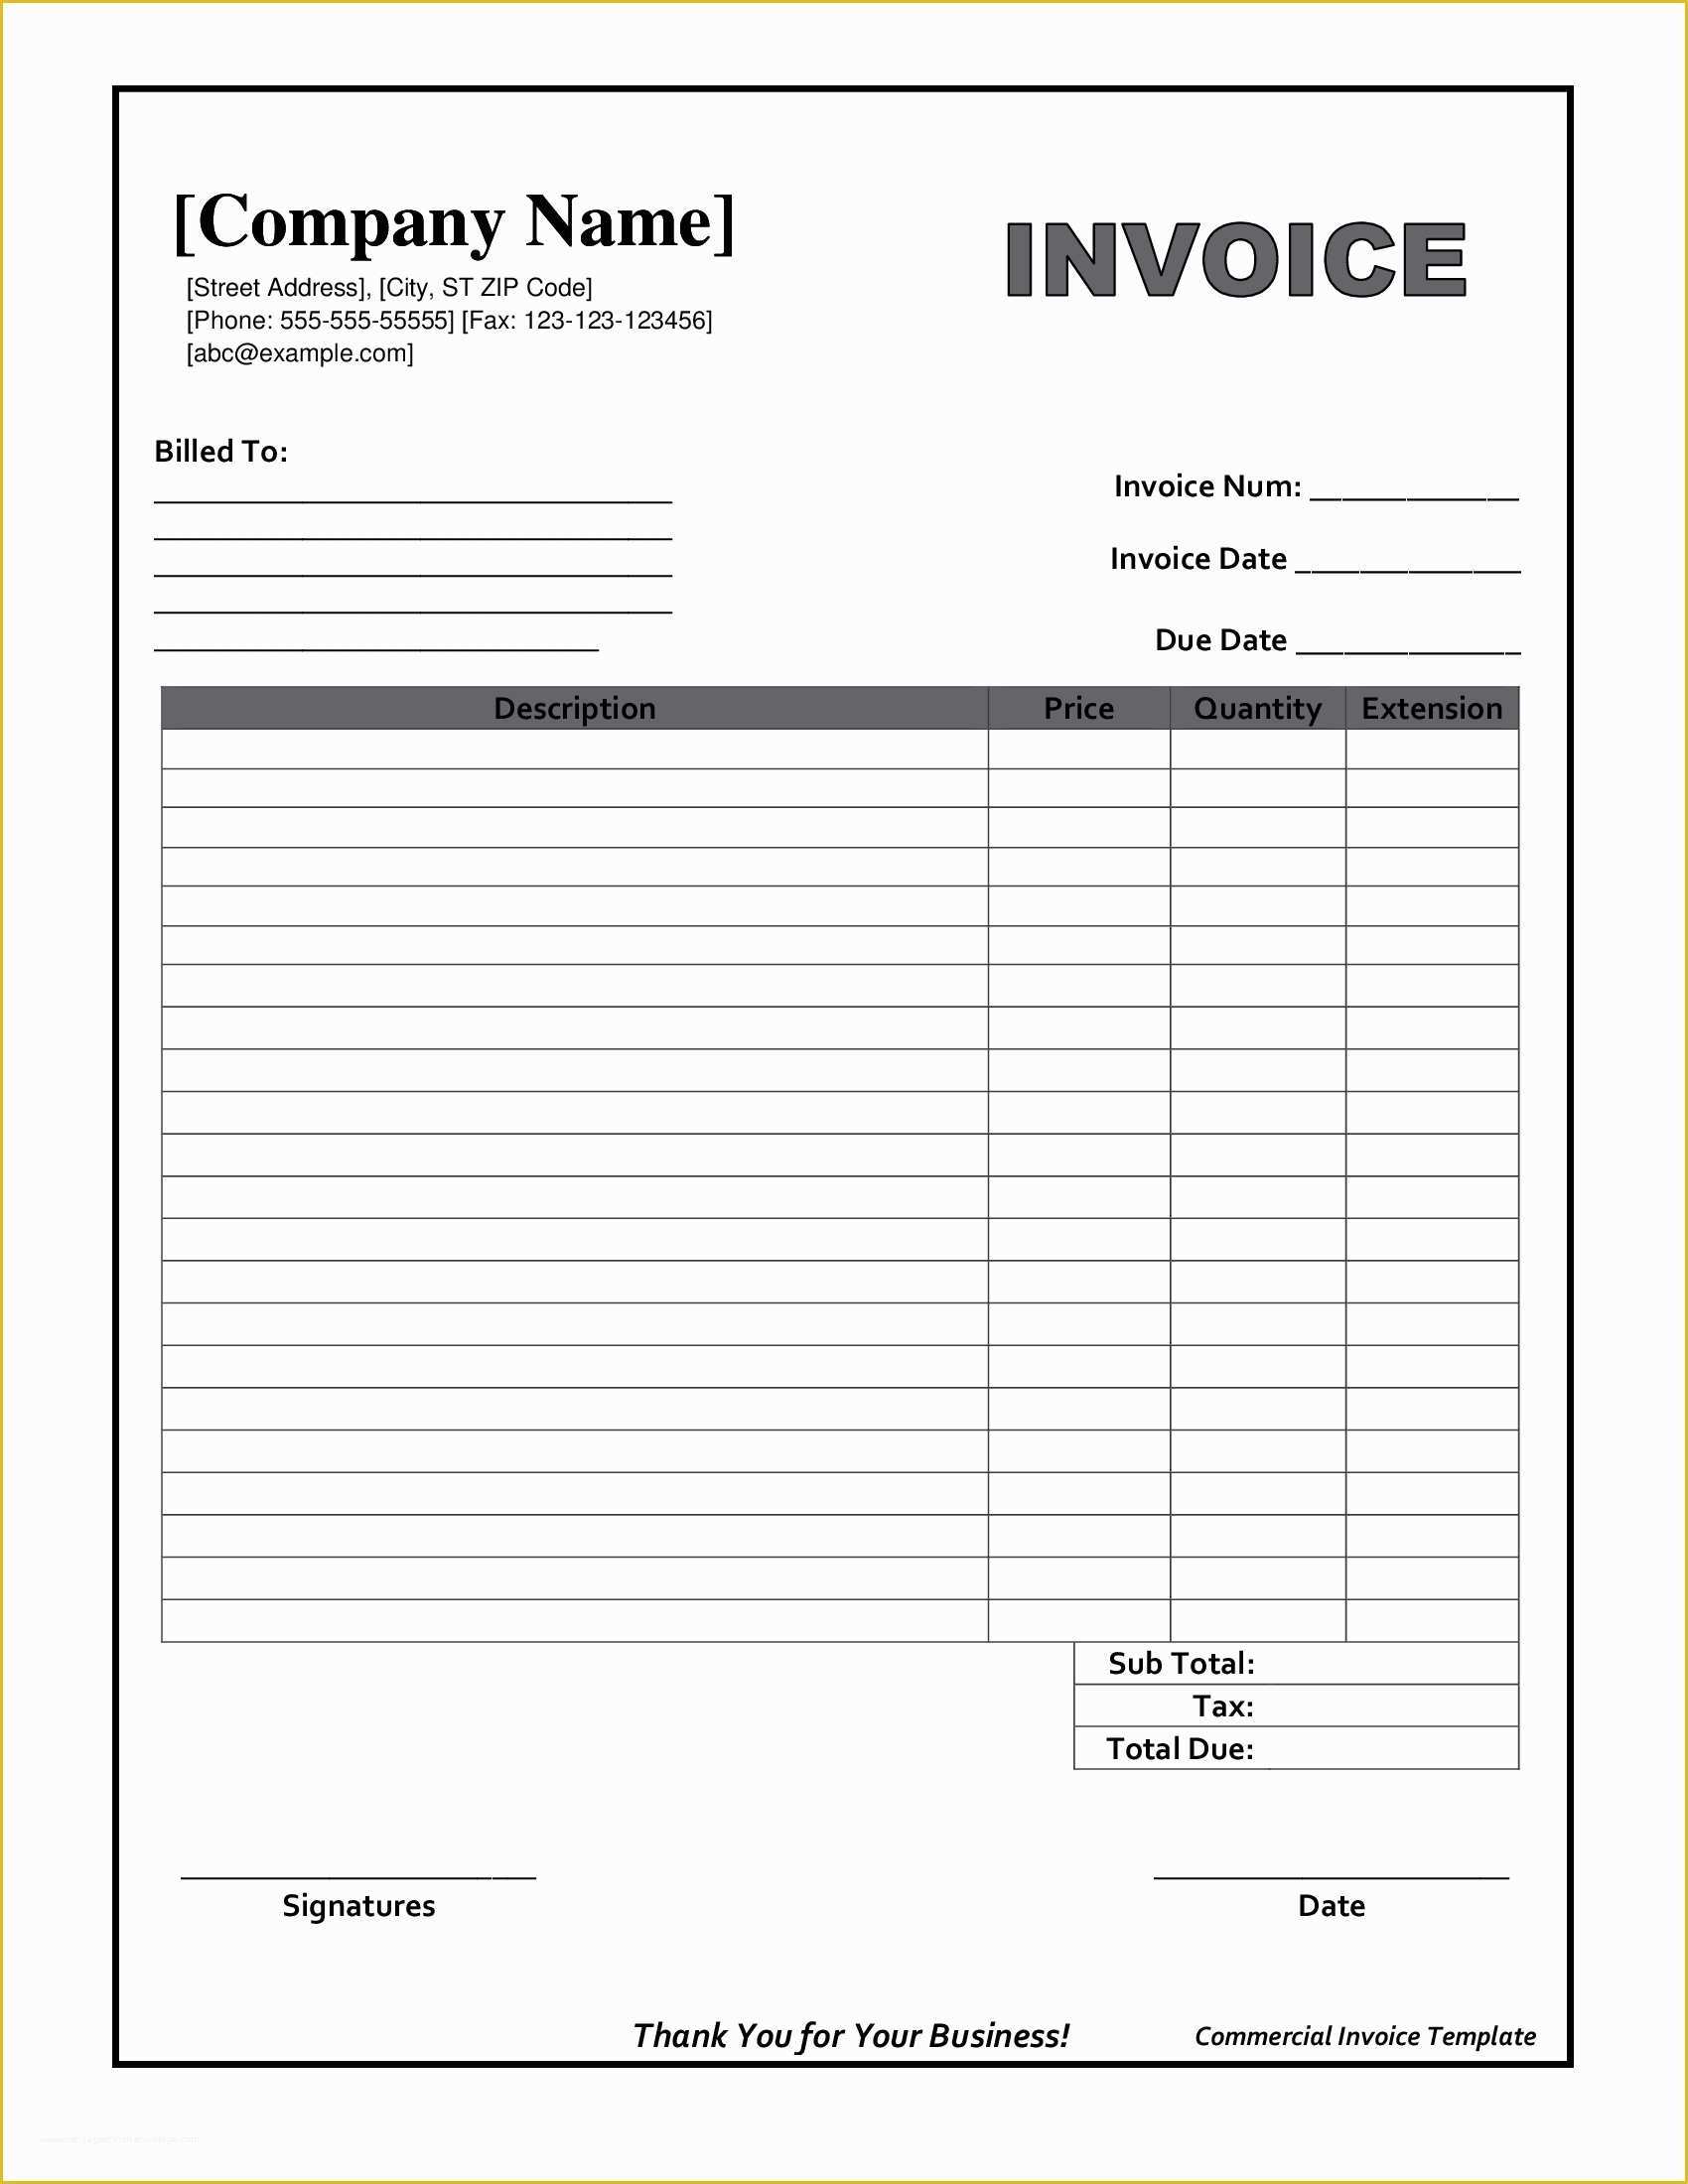 Work Invoice Template Free Of Blank Invoice form Free